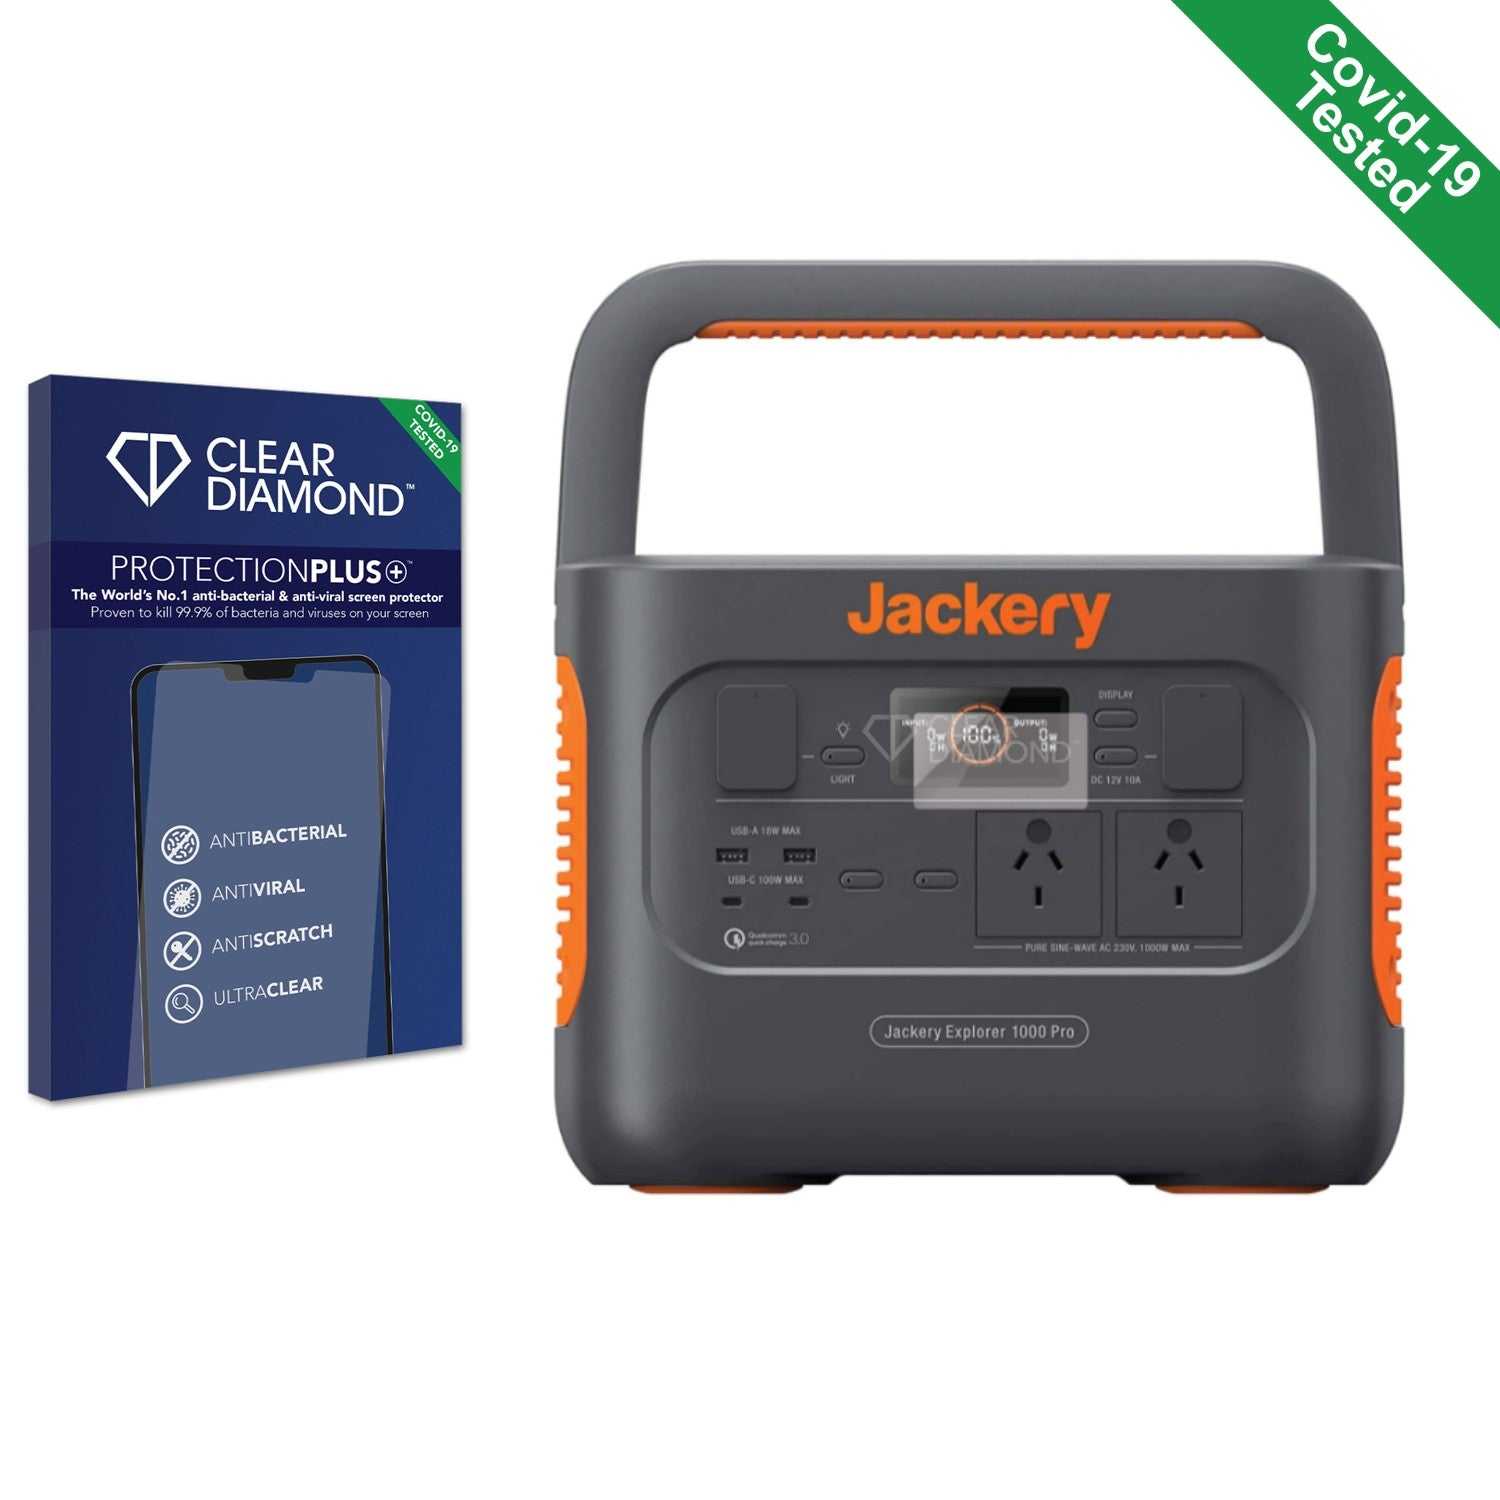 ScreenShield, Clear Diamond Anti-viral Screen Protector for Jackery Explorer 1000 Pro Portable Power Station